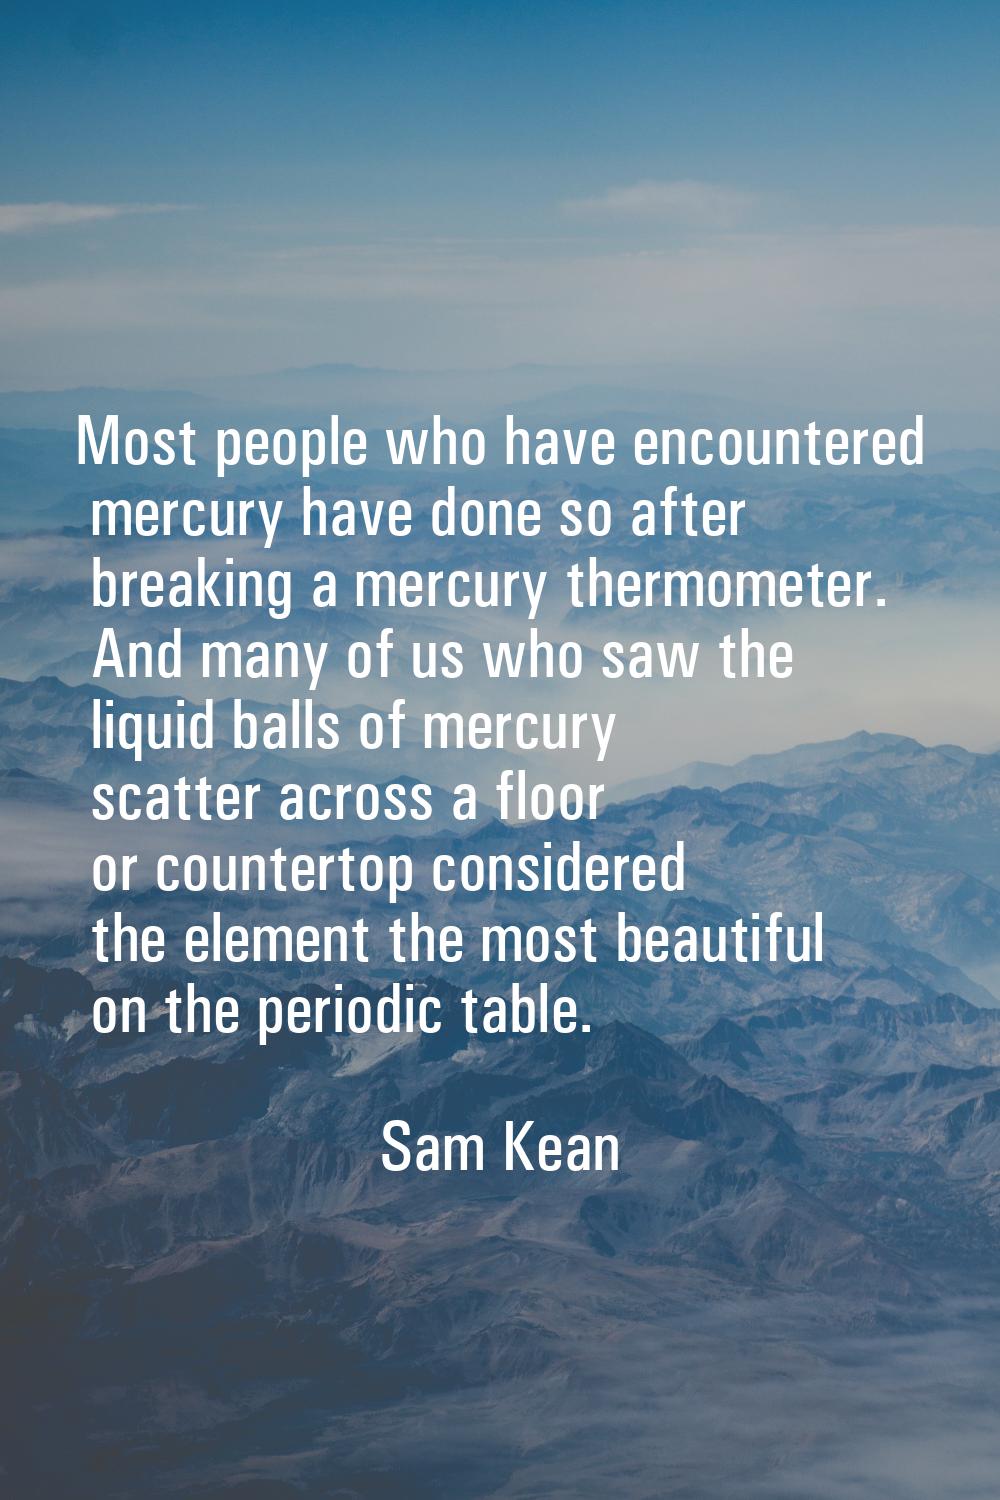 Most people who have encountered mercury have done so after breaking a mercury thermometer. And man